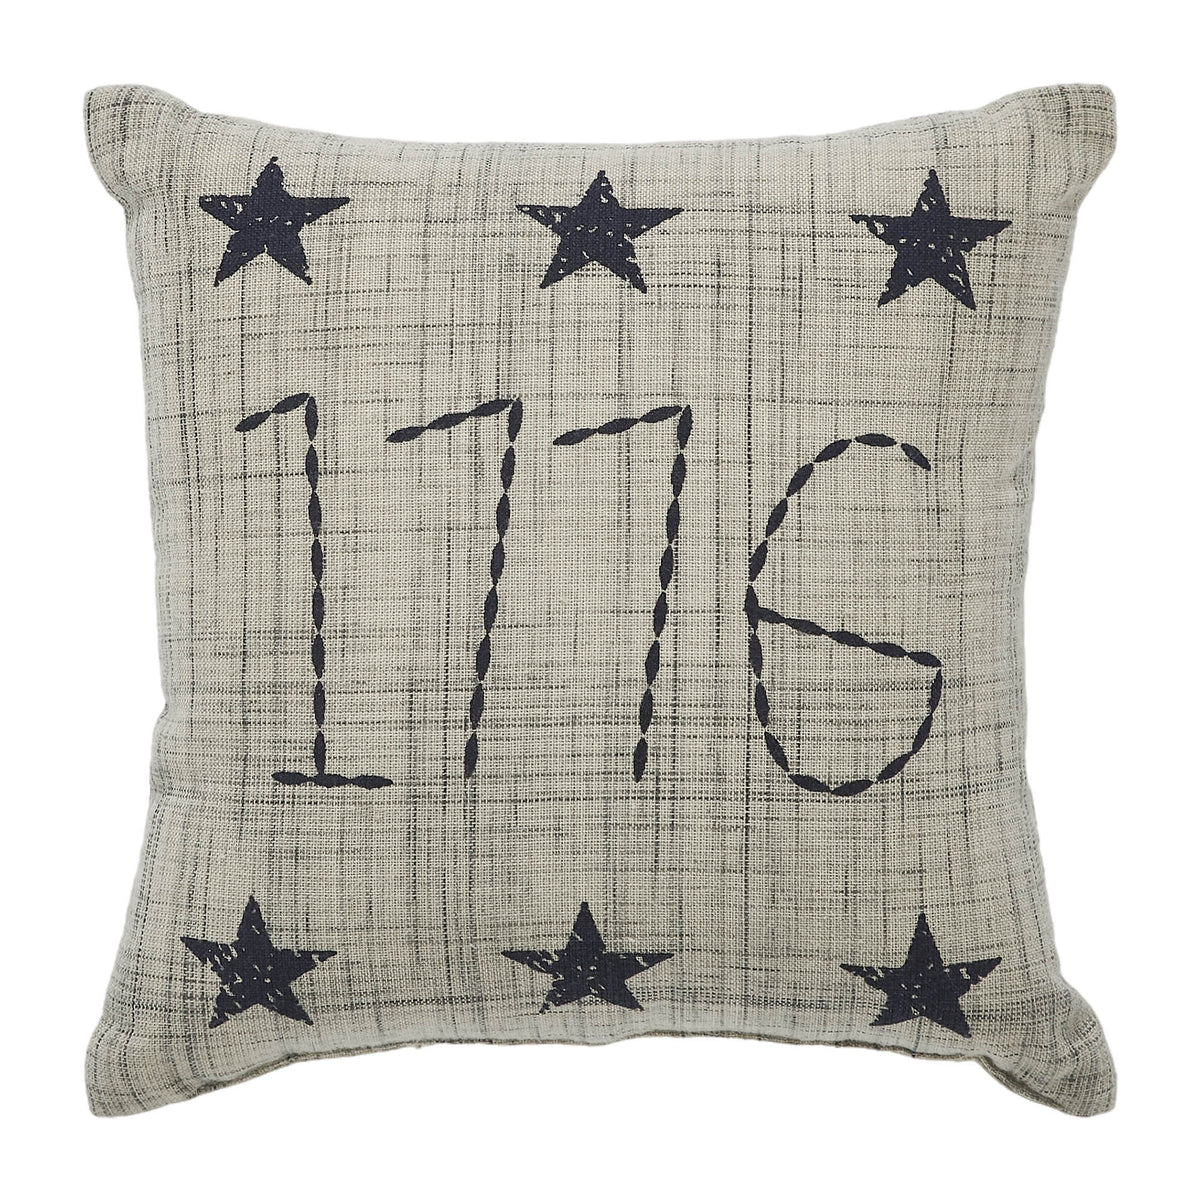 My Country 1776 Pillow 6x6